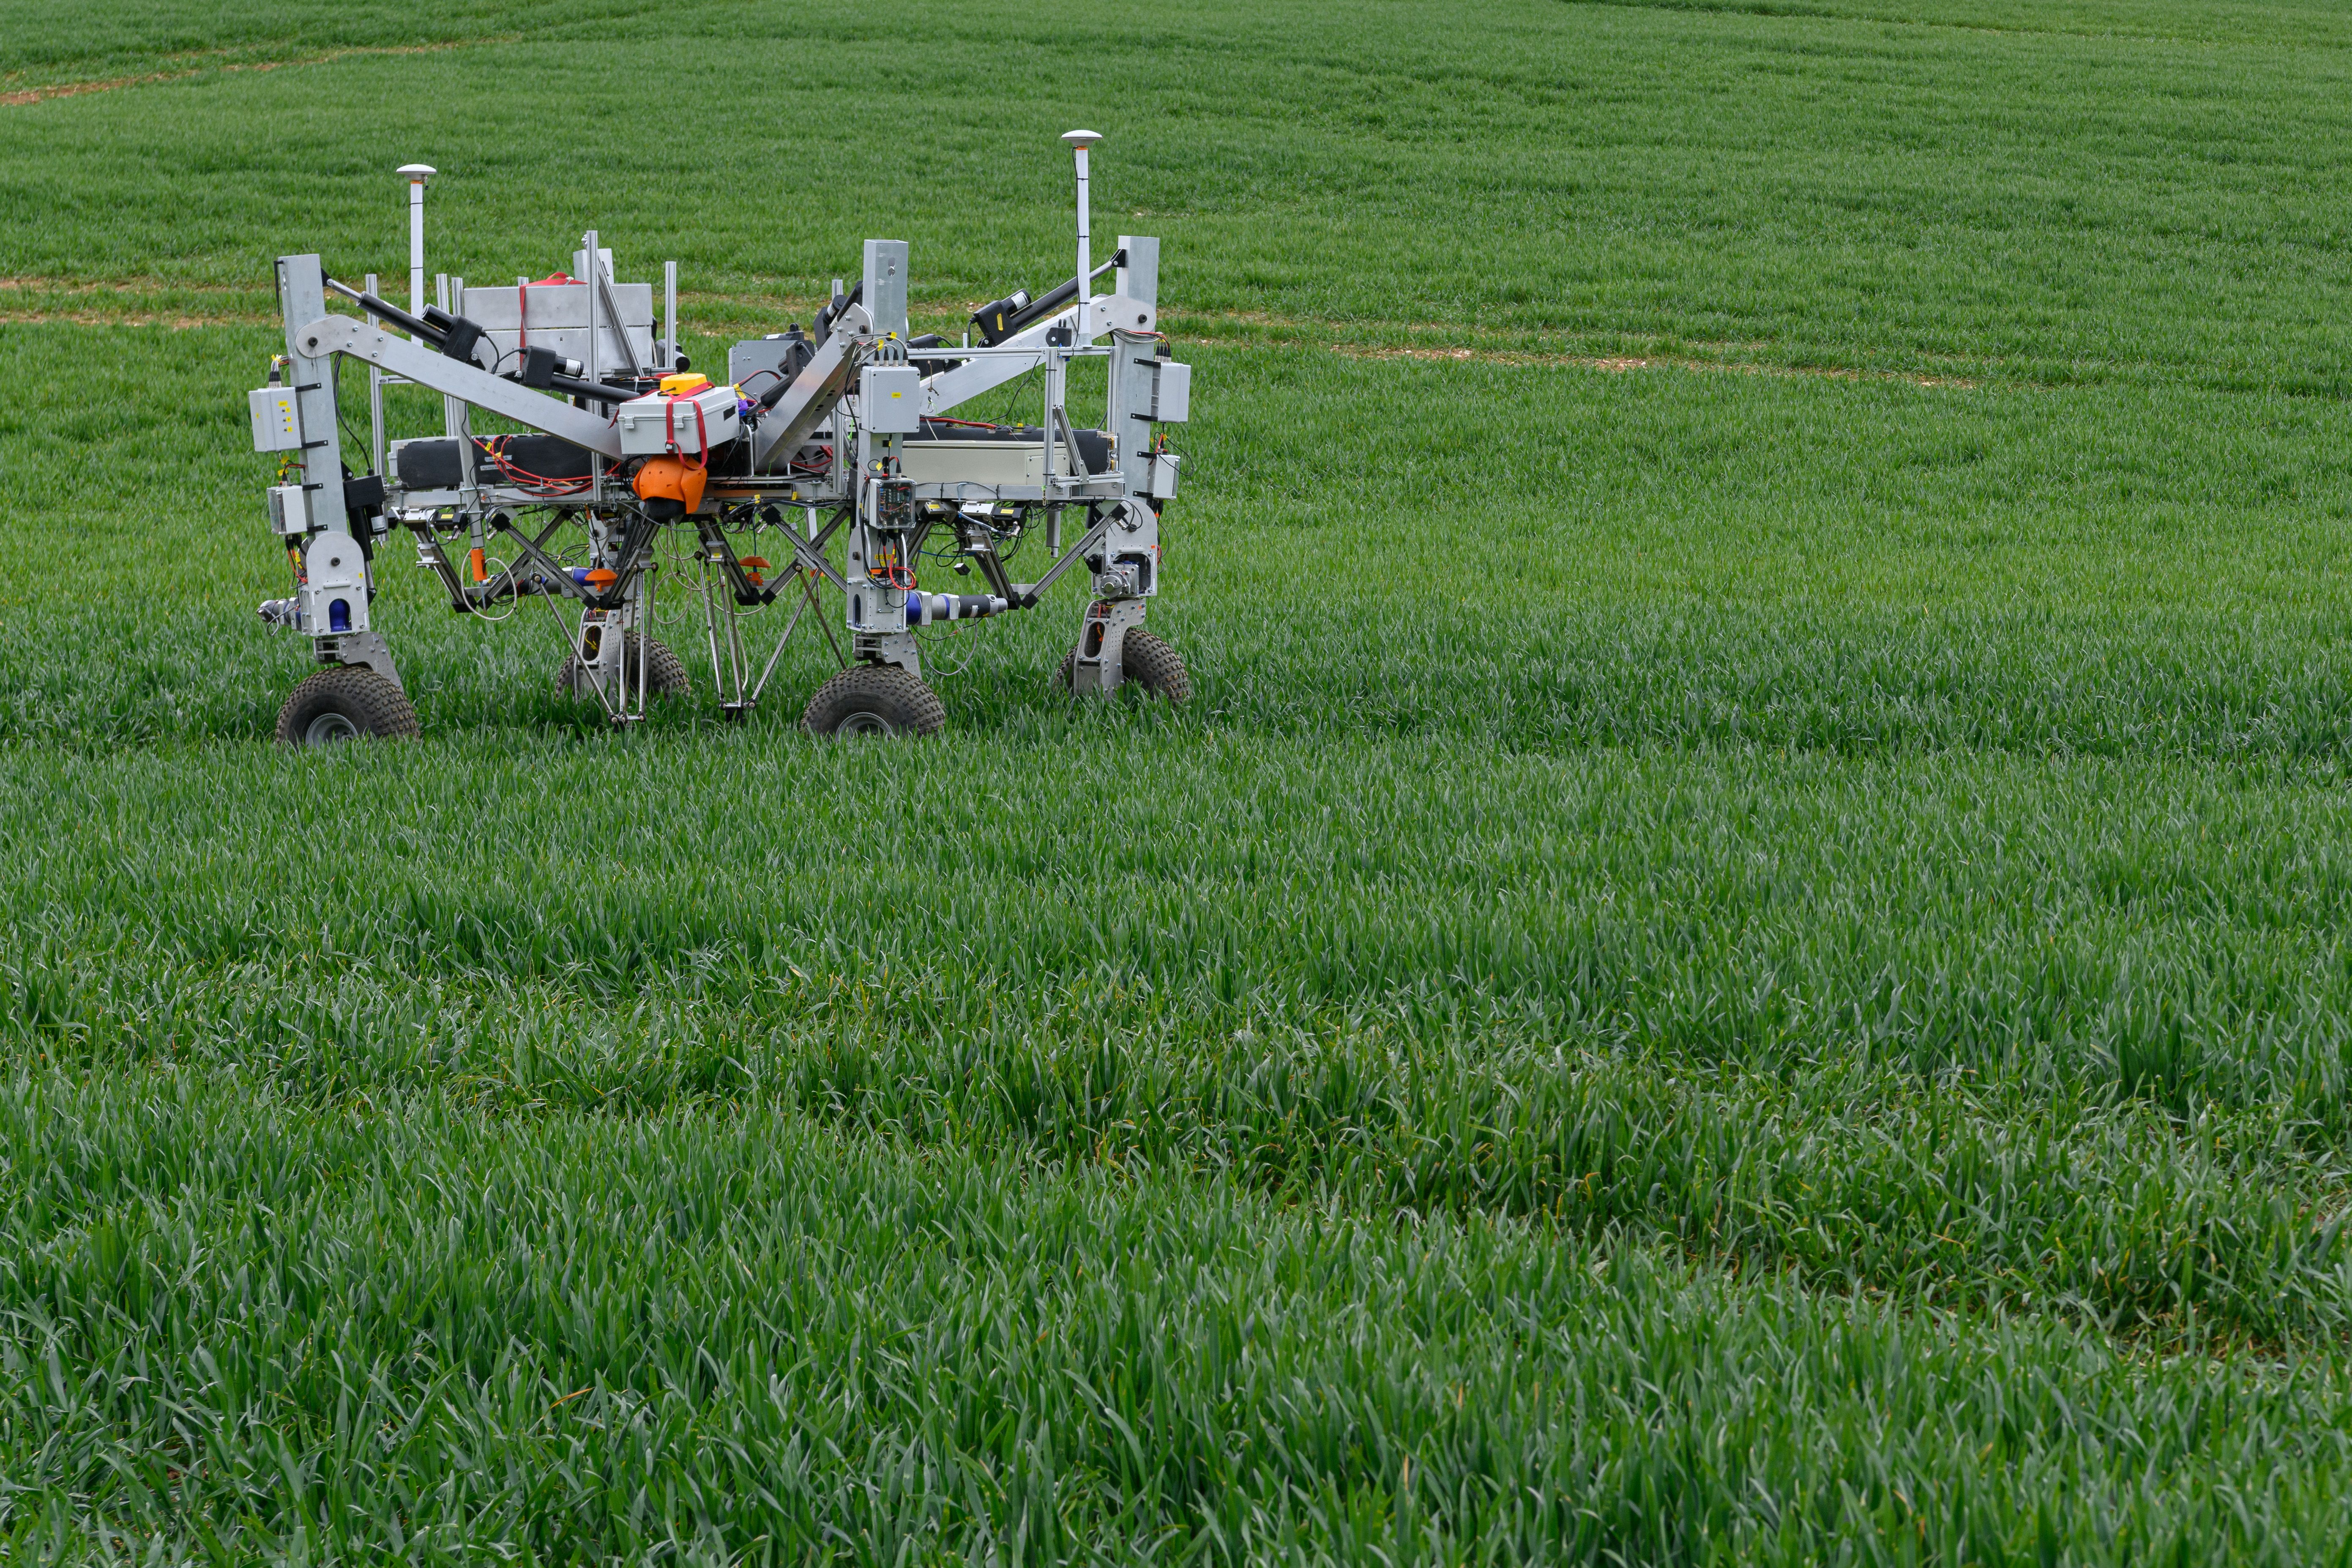 The igus® Delta robot working alongside with the Small Robot company with zapping weeds!